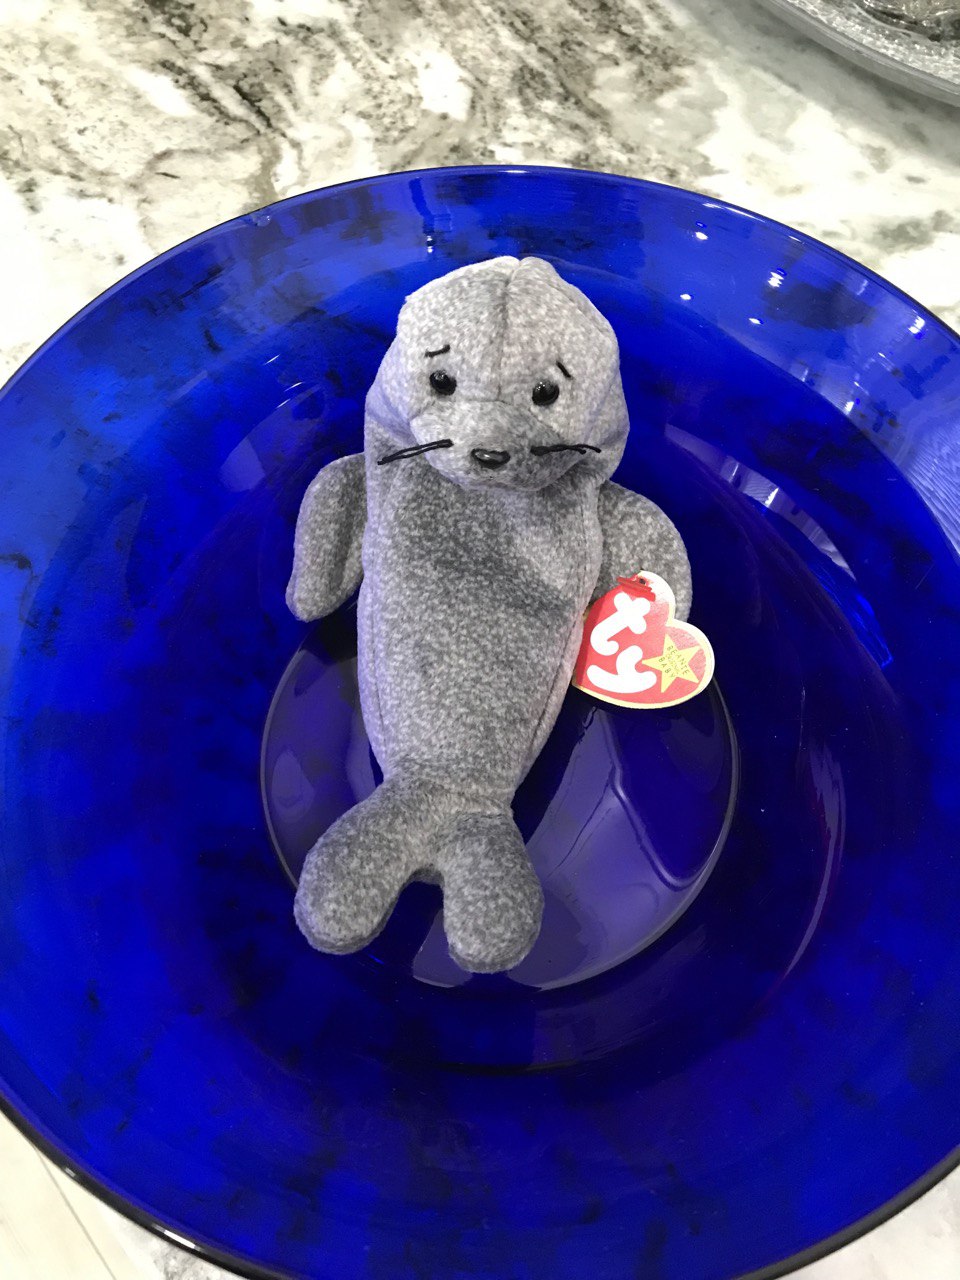 *RARE* MINT Slippery Beanie Baby 1998 With Tag